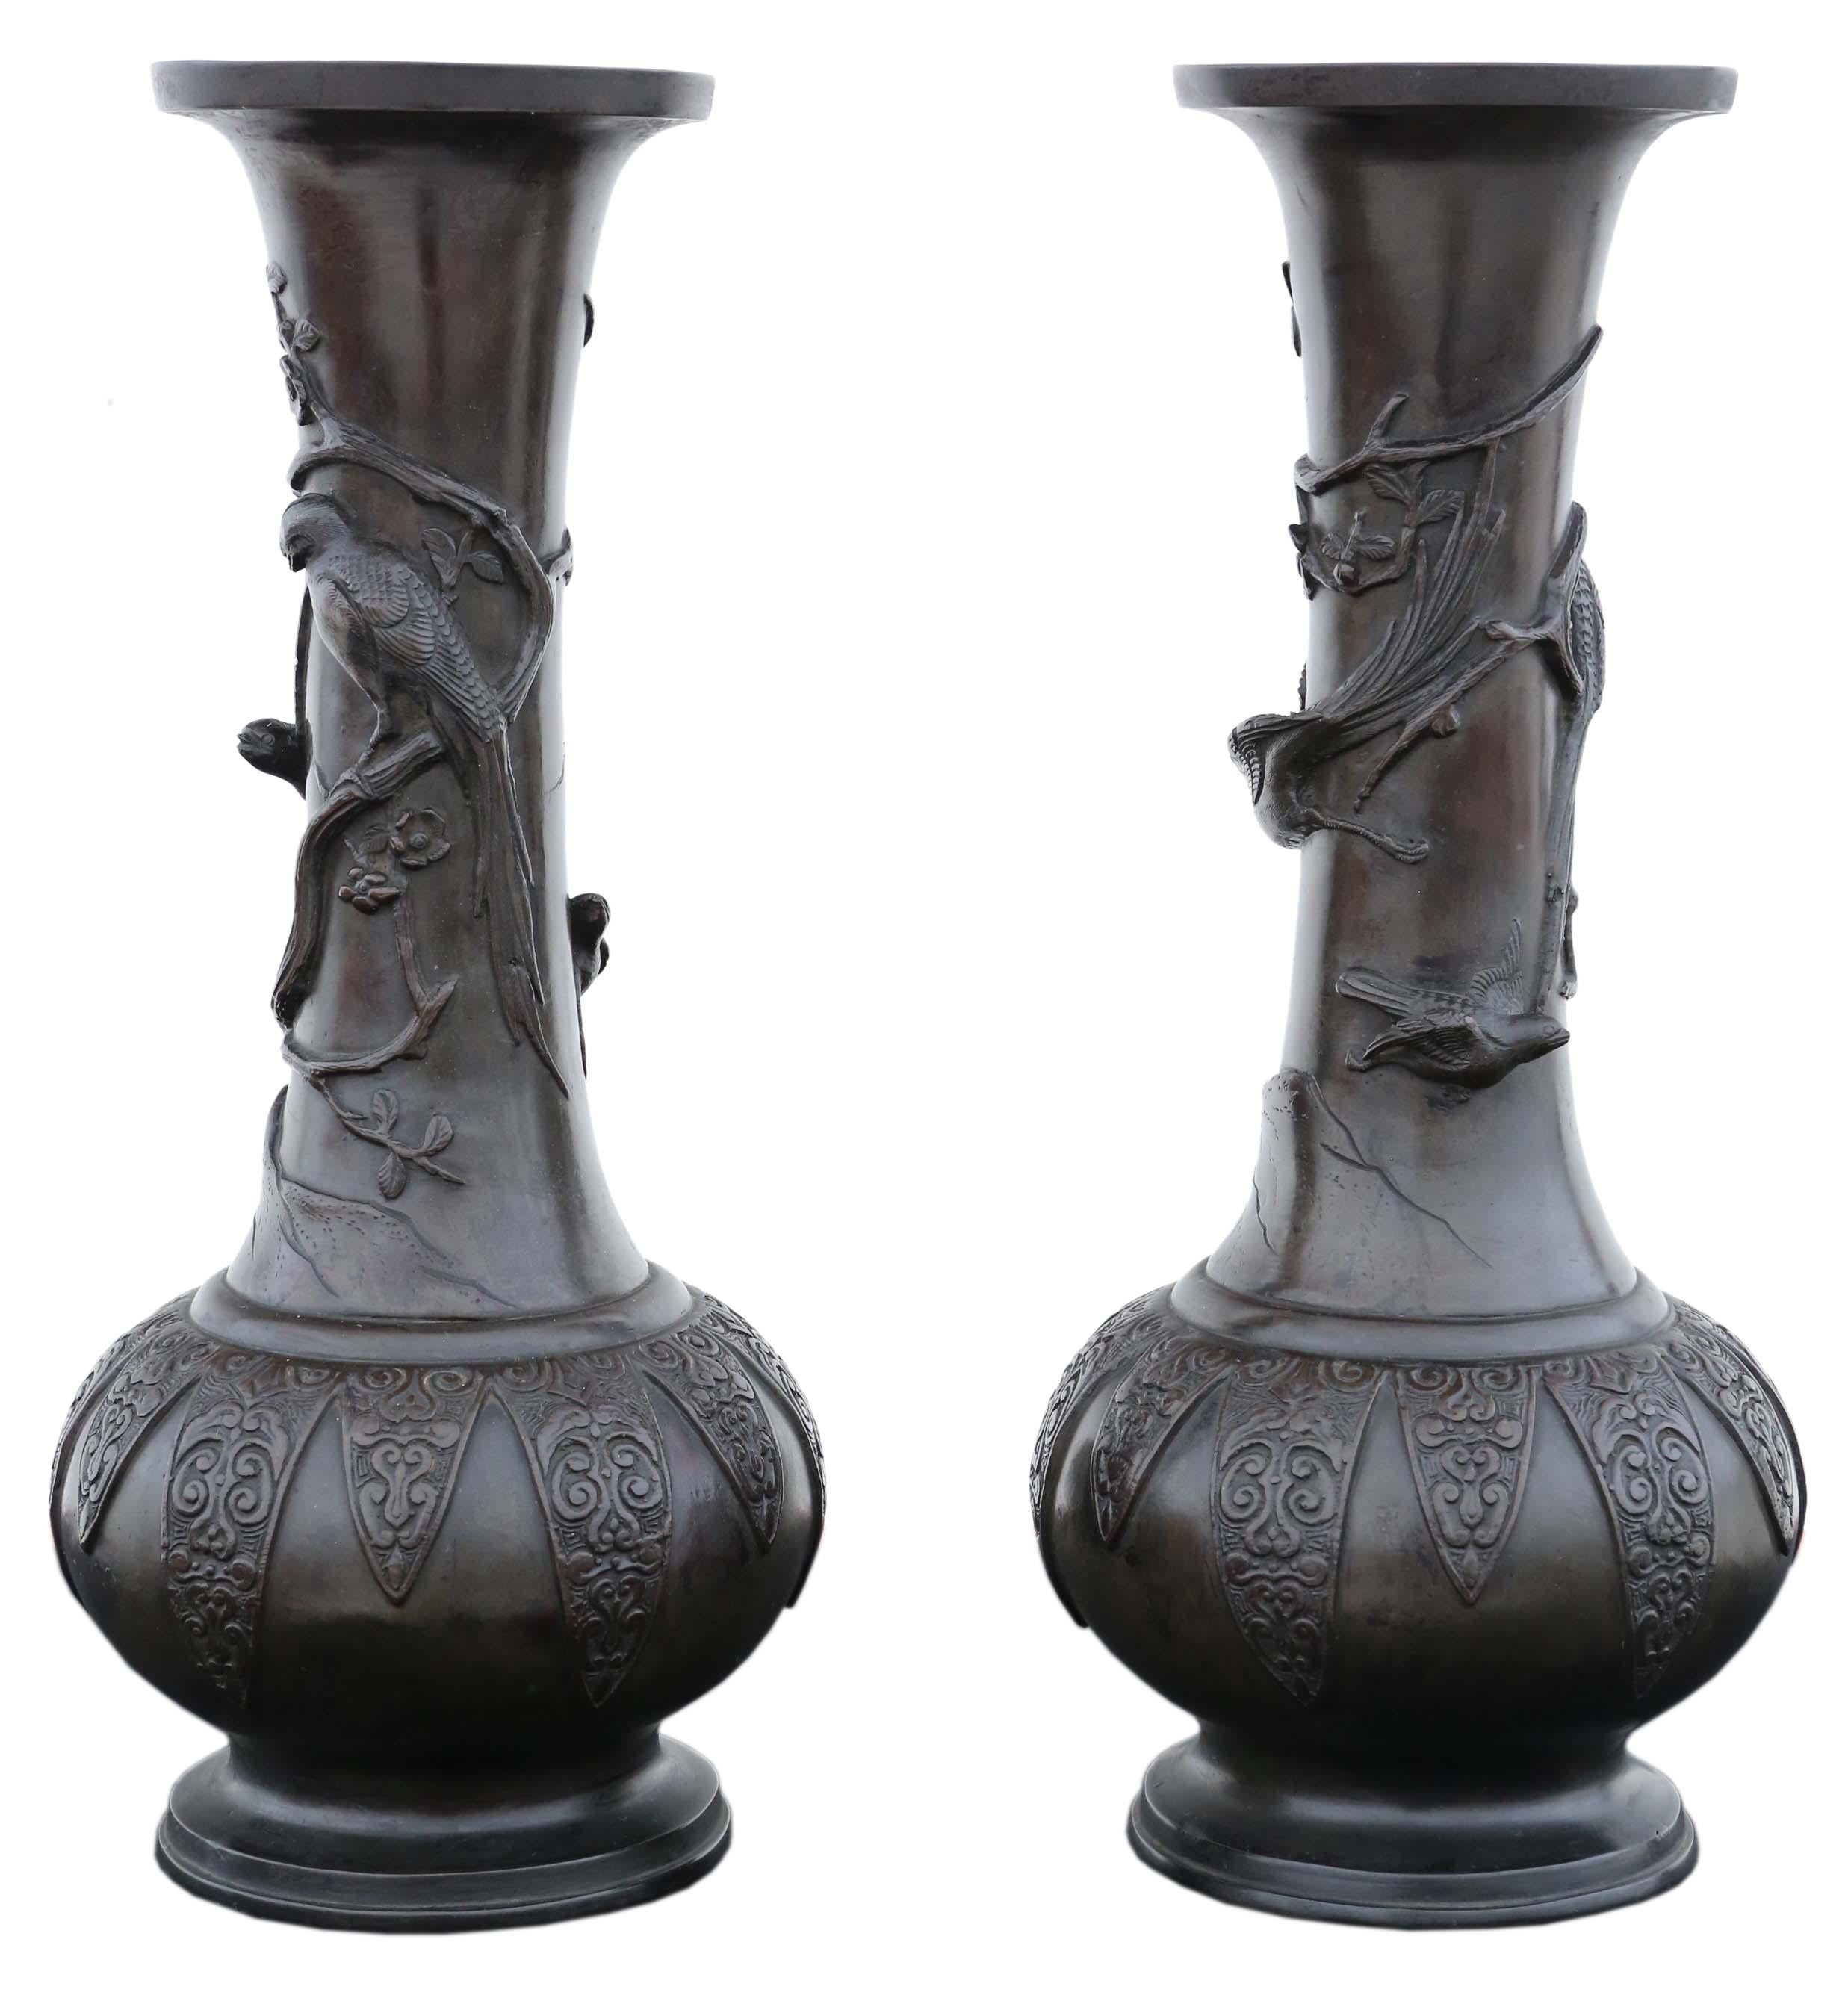 Antique Very Large Pair of Japanese Bronze Vases - 19th Century Meiji Period For Sale 1